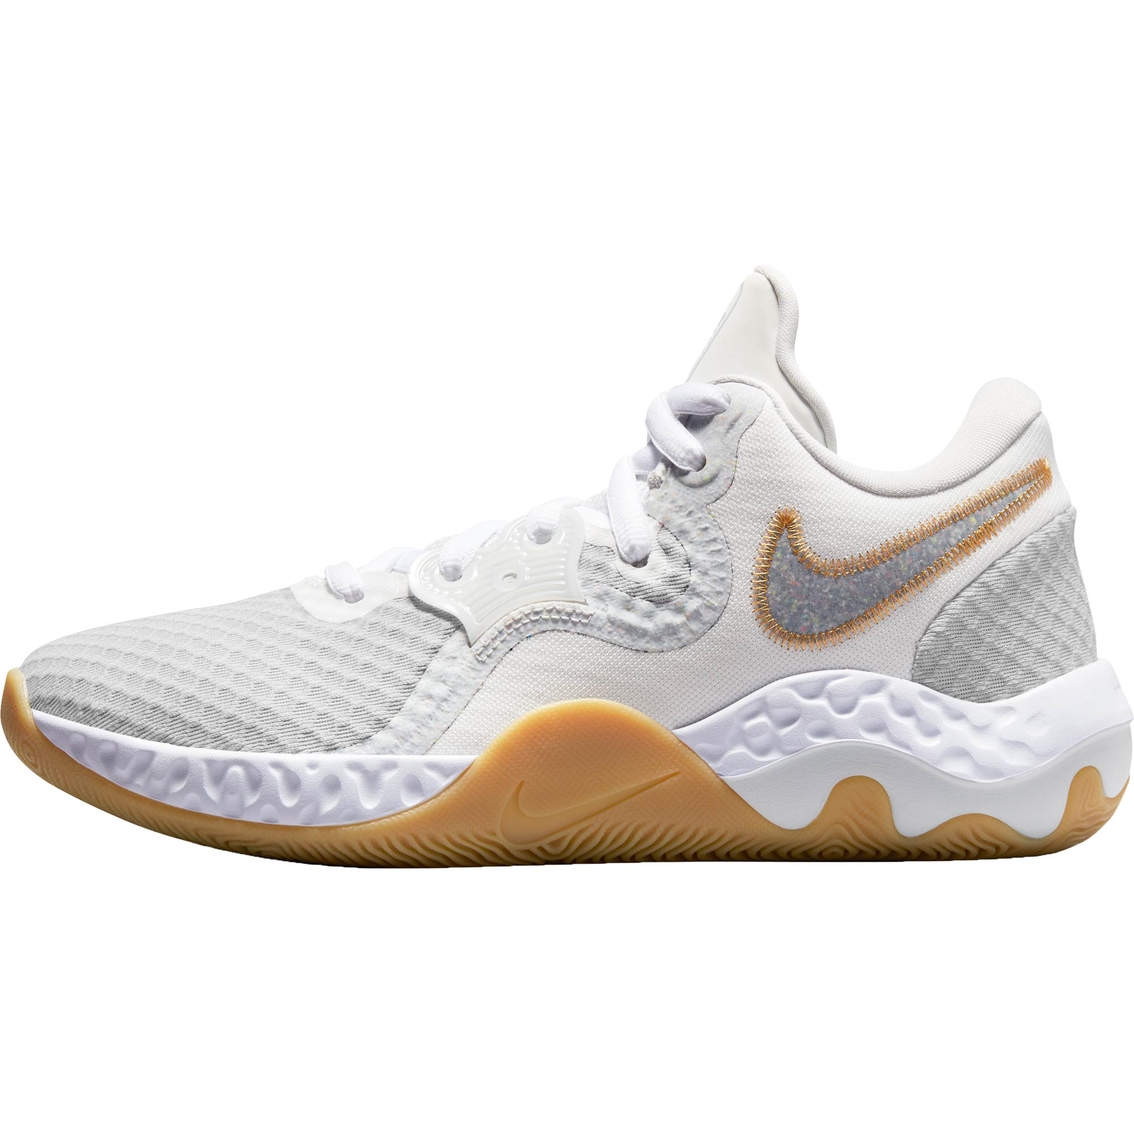 Nike Men's Renew Elevate 2 Basketball Shoes - Image 3 of 10